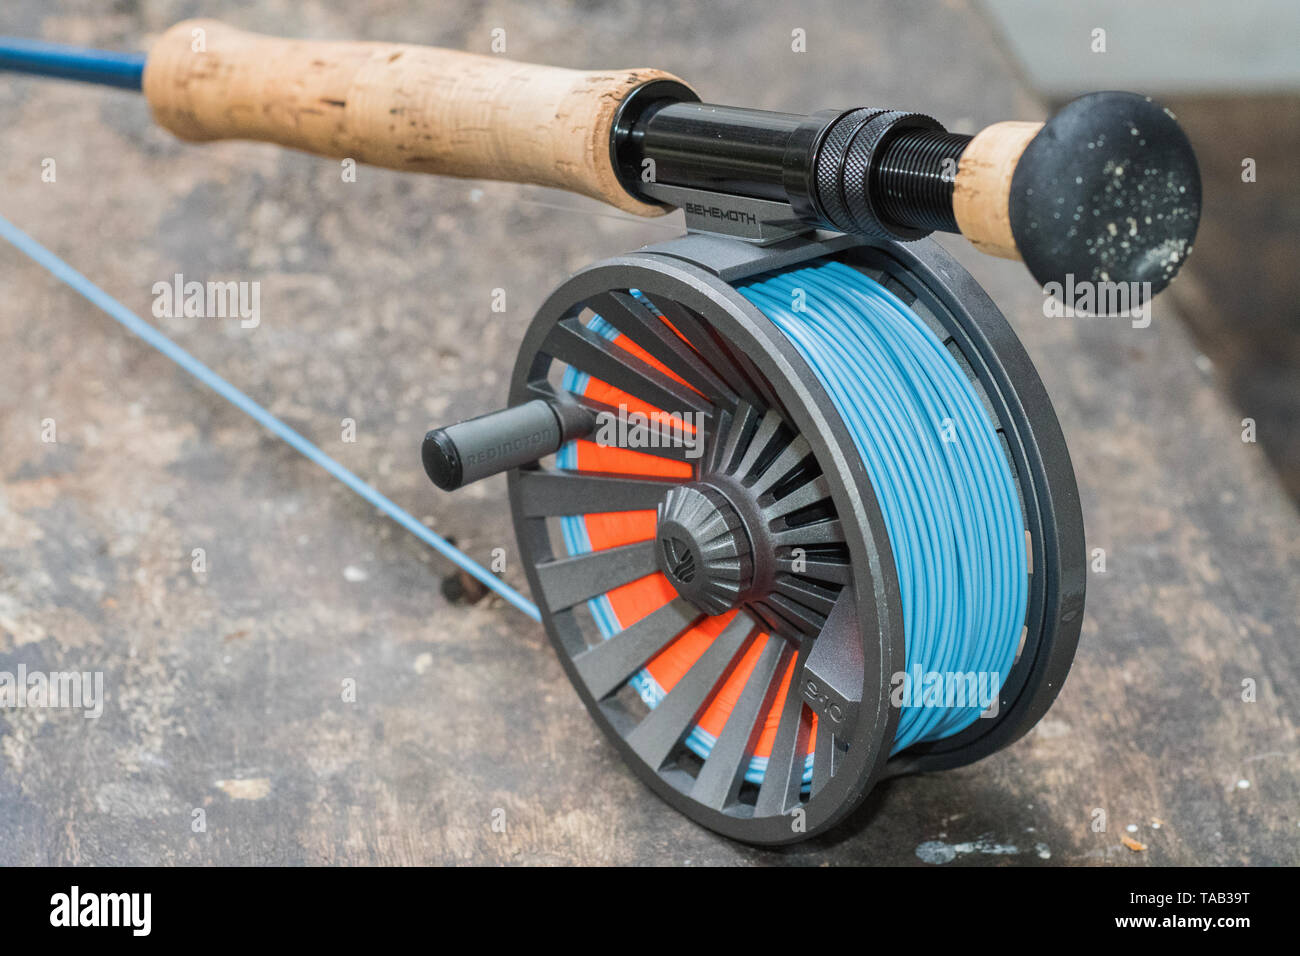 Saltwater fly fishing fly rod and reel Stock Photo - Alamy